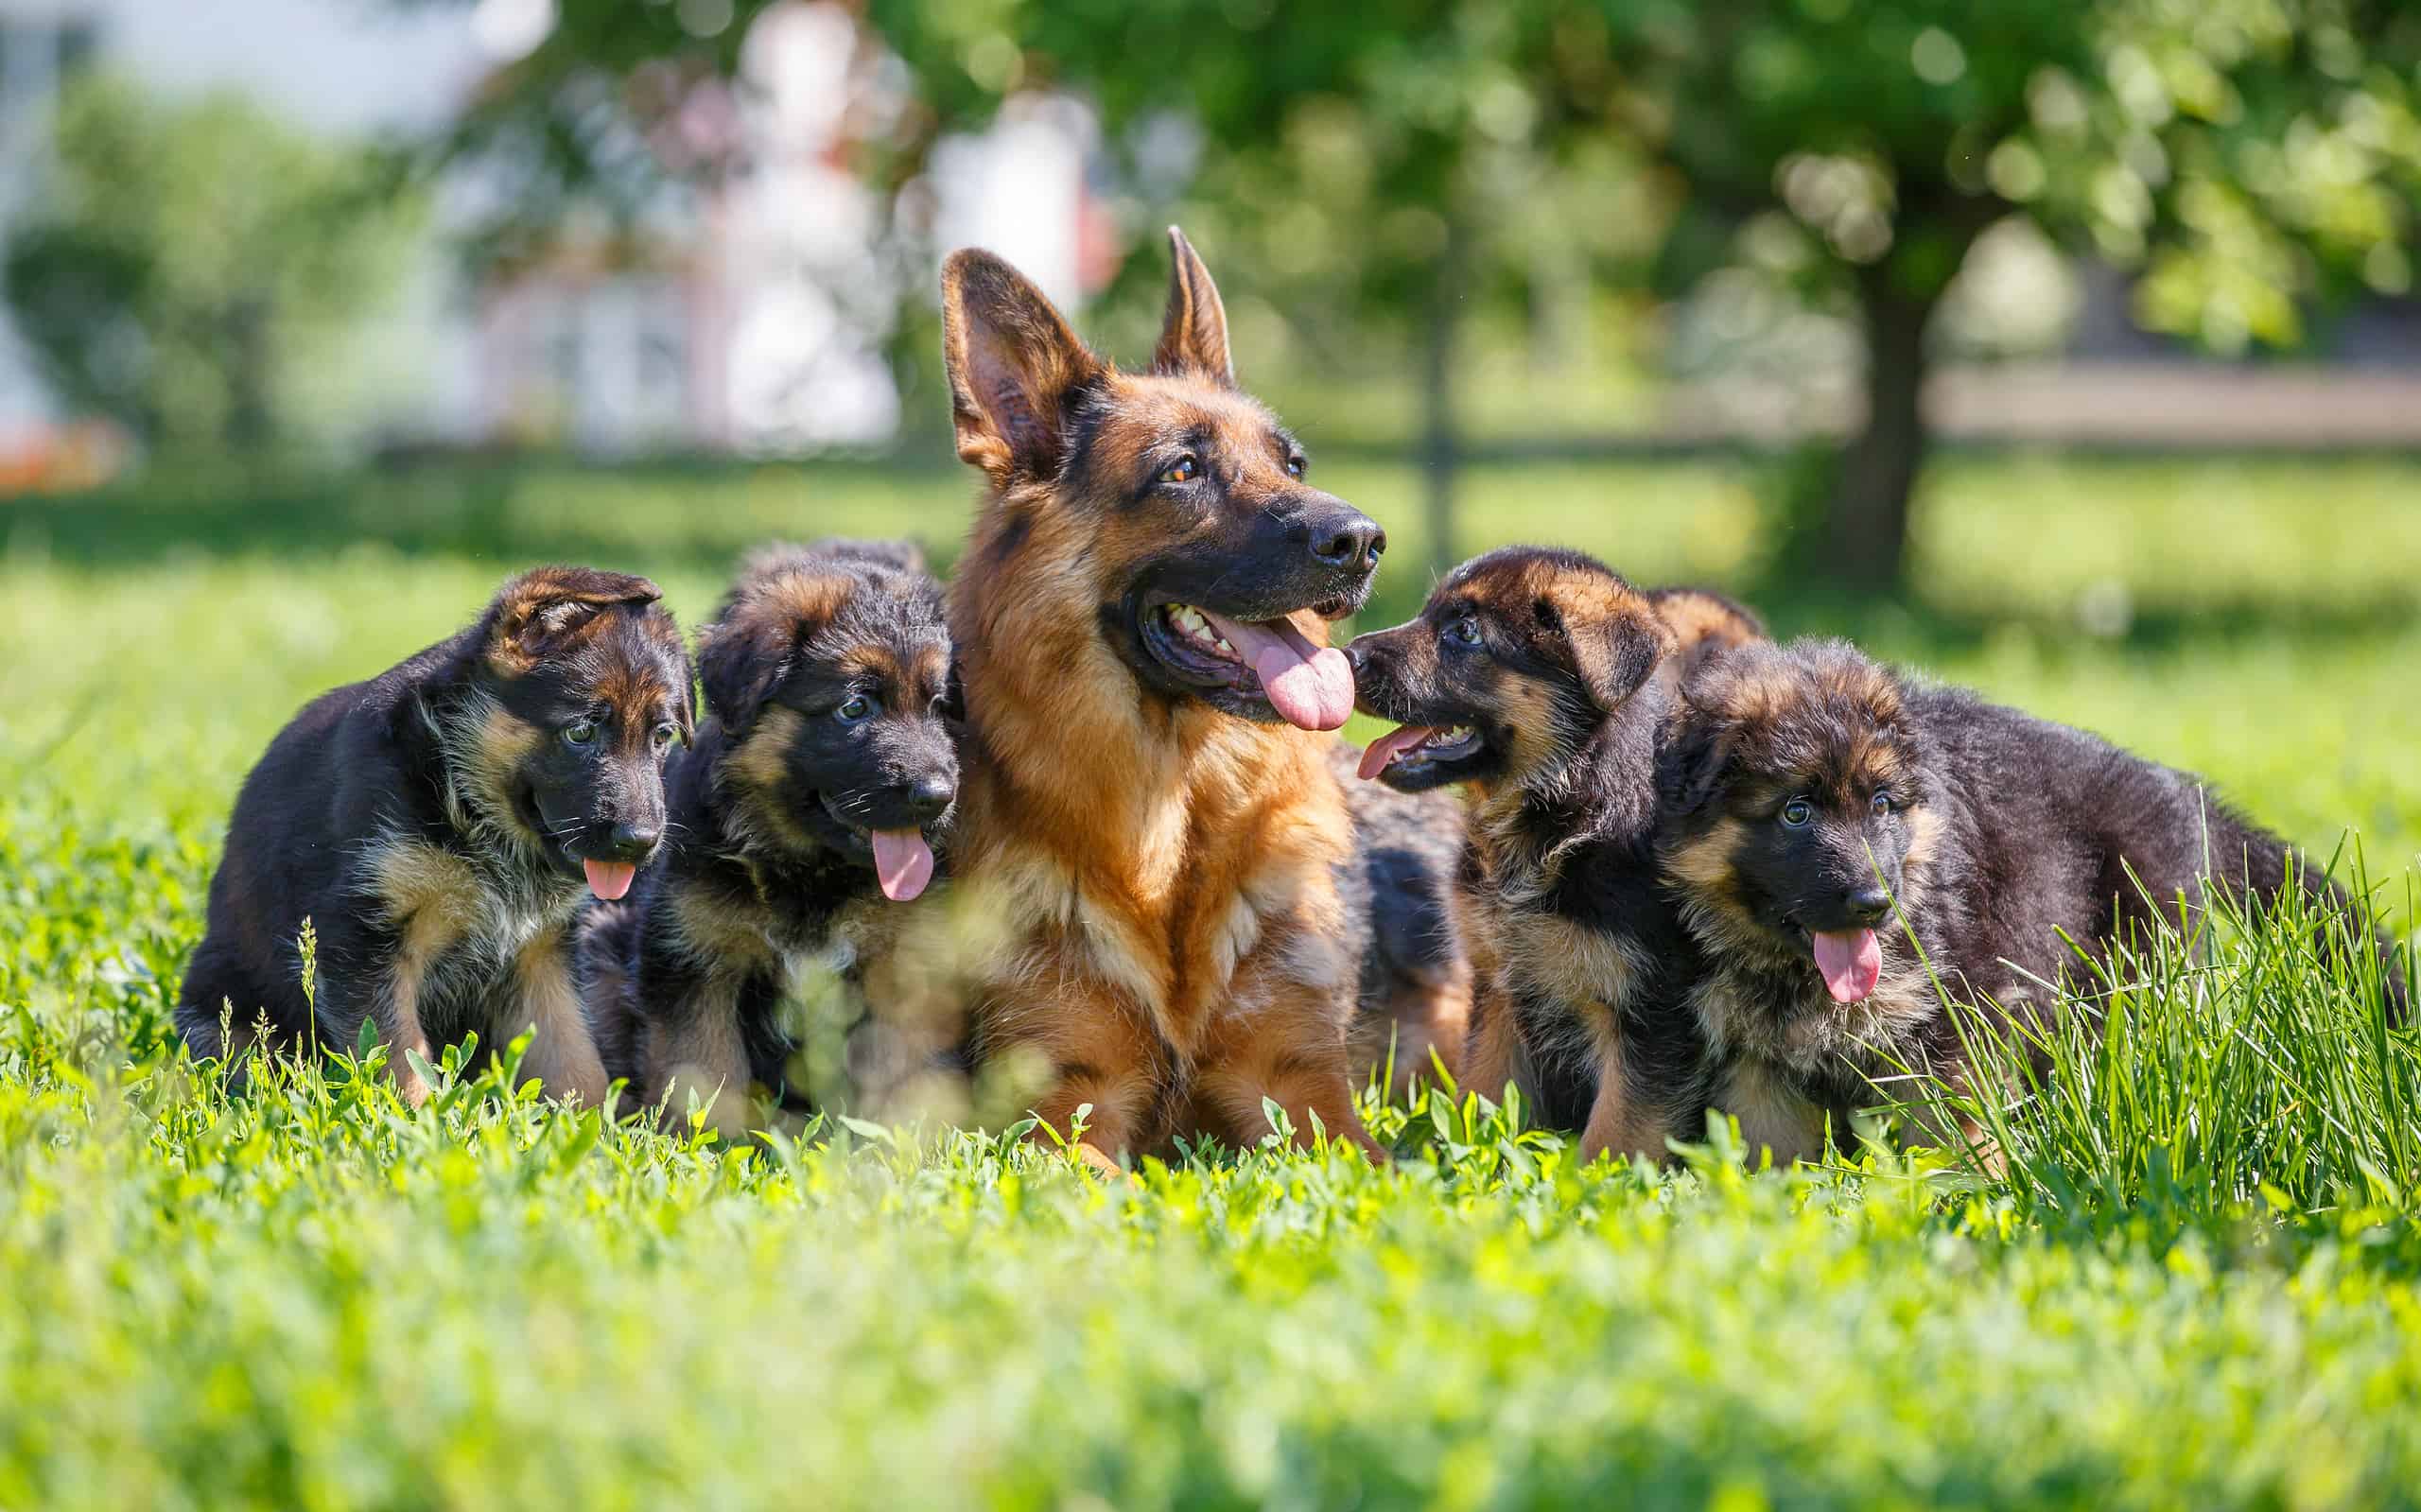 German shepherd with its puppies resting on grass